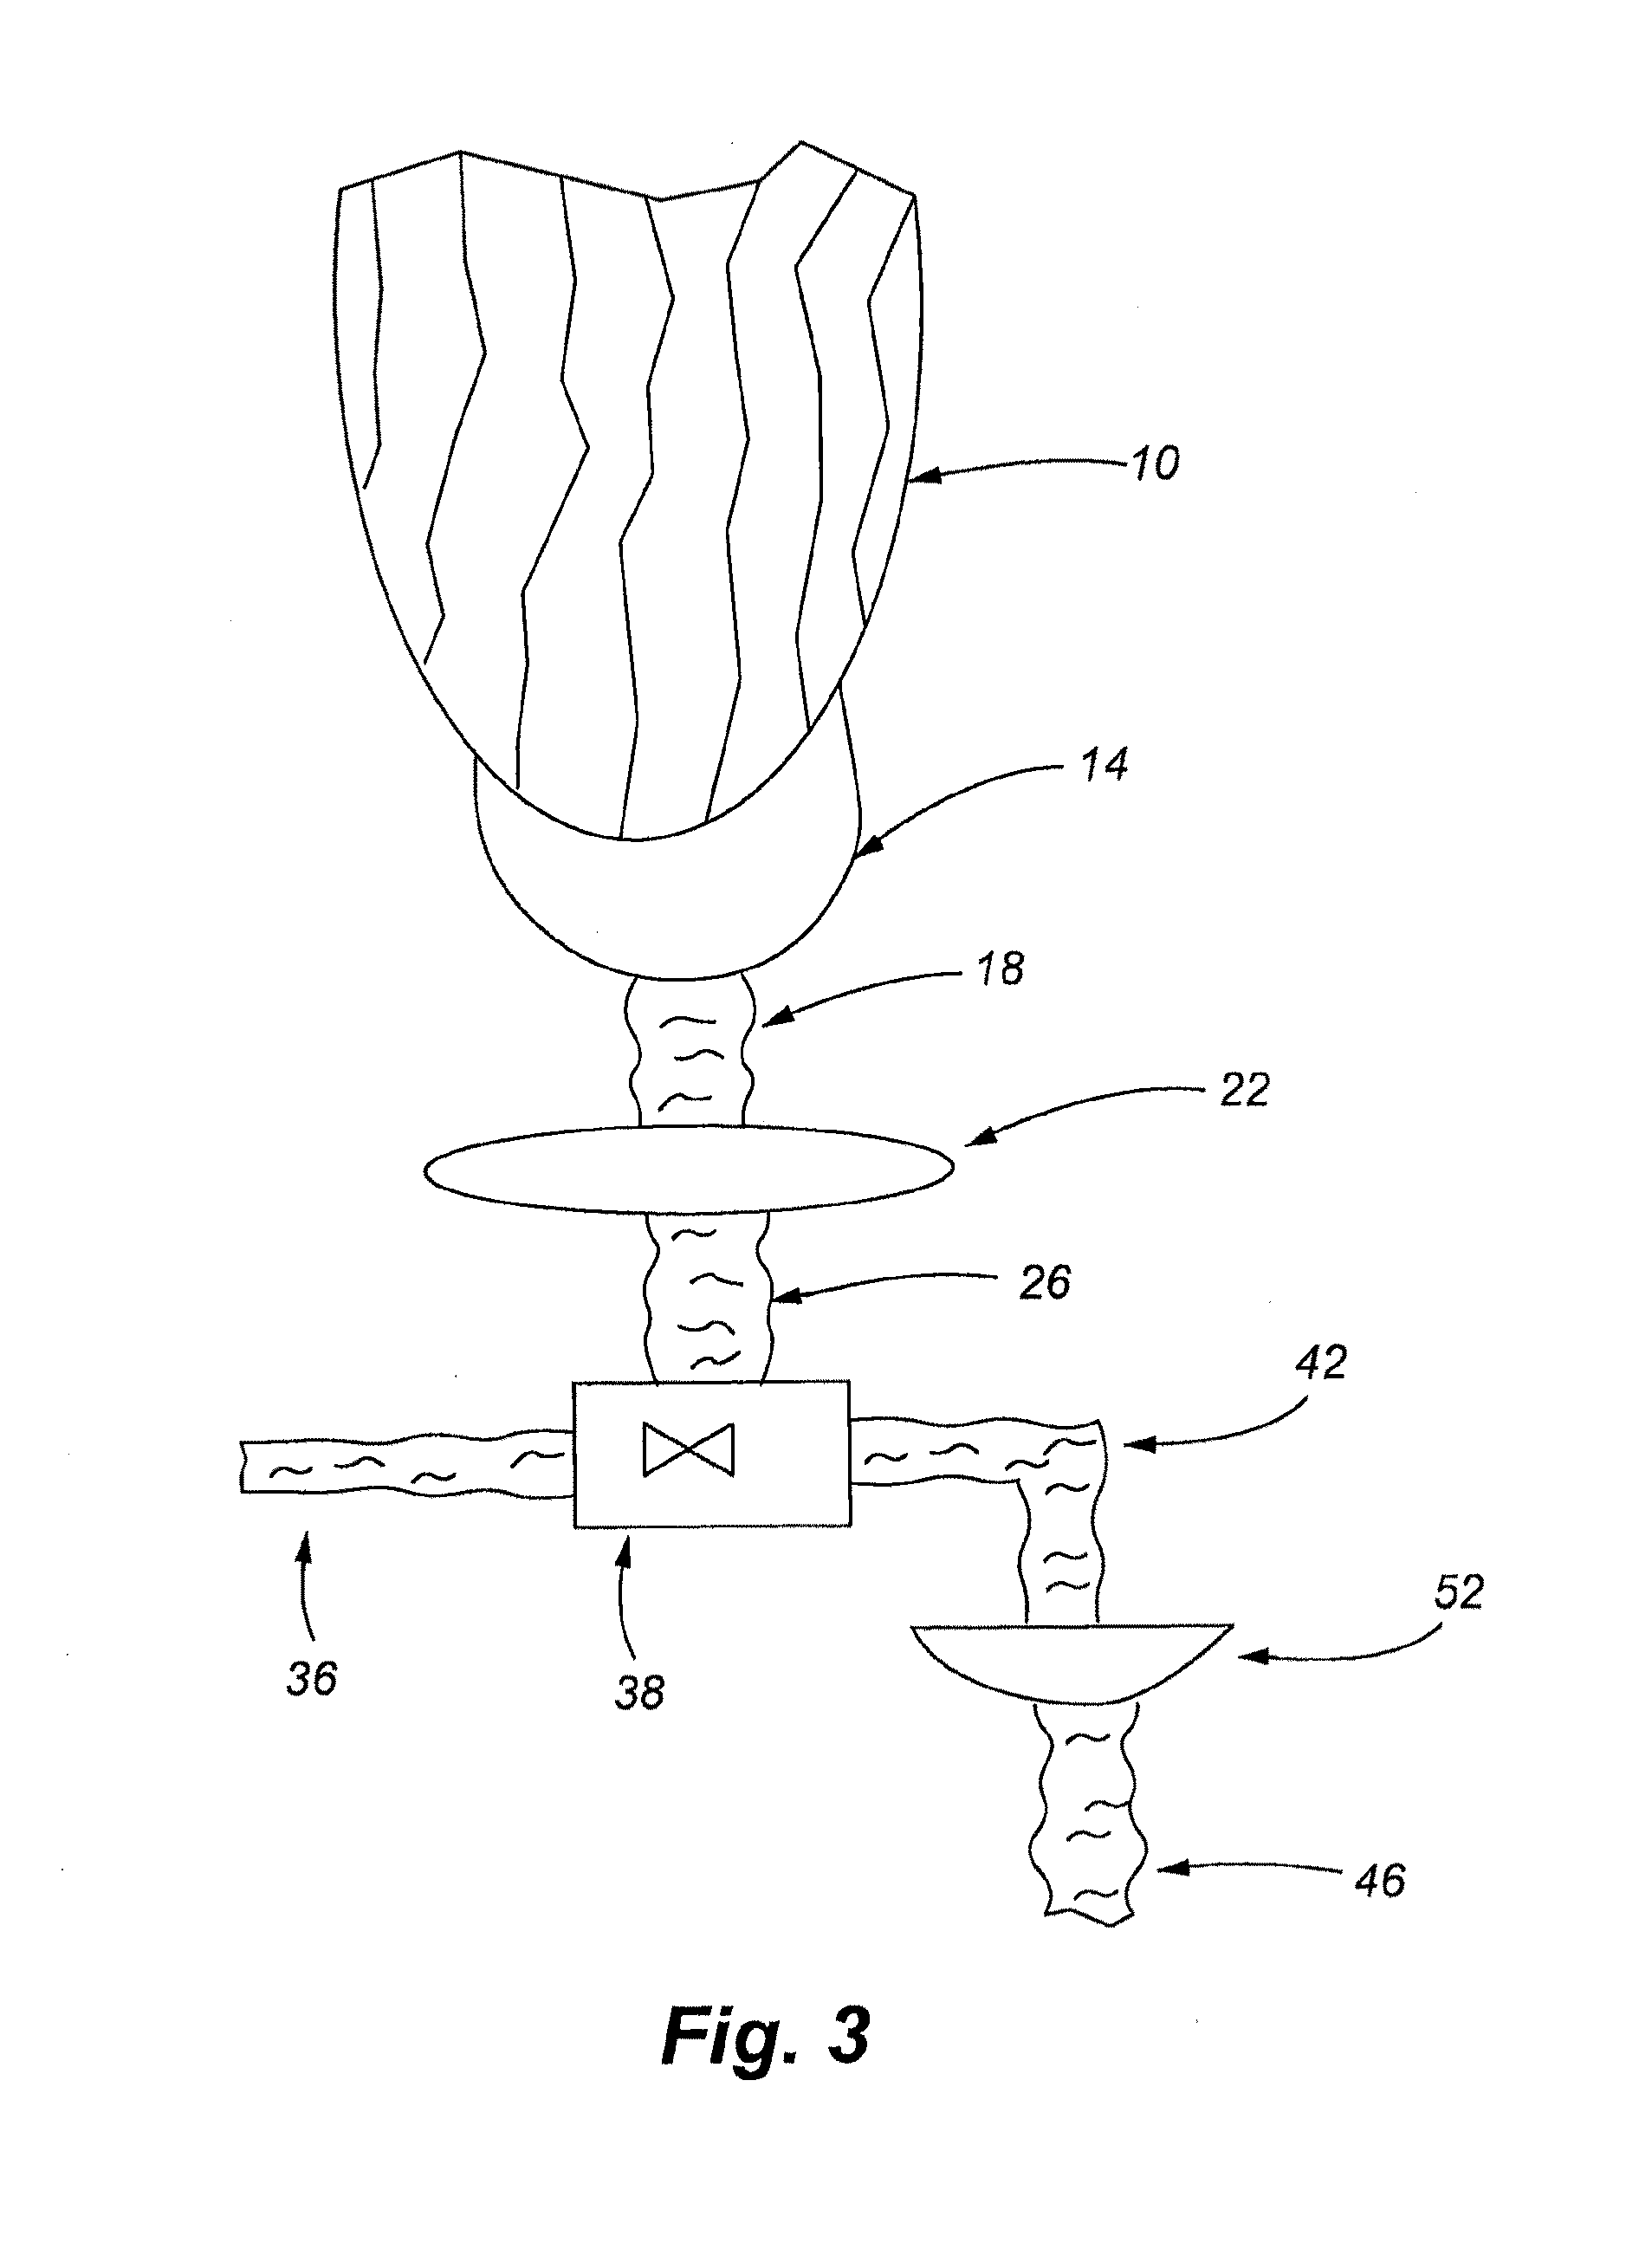 Methods and systems for producing, trading, and transporting water